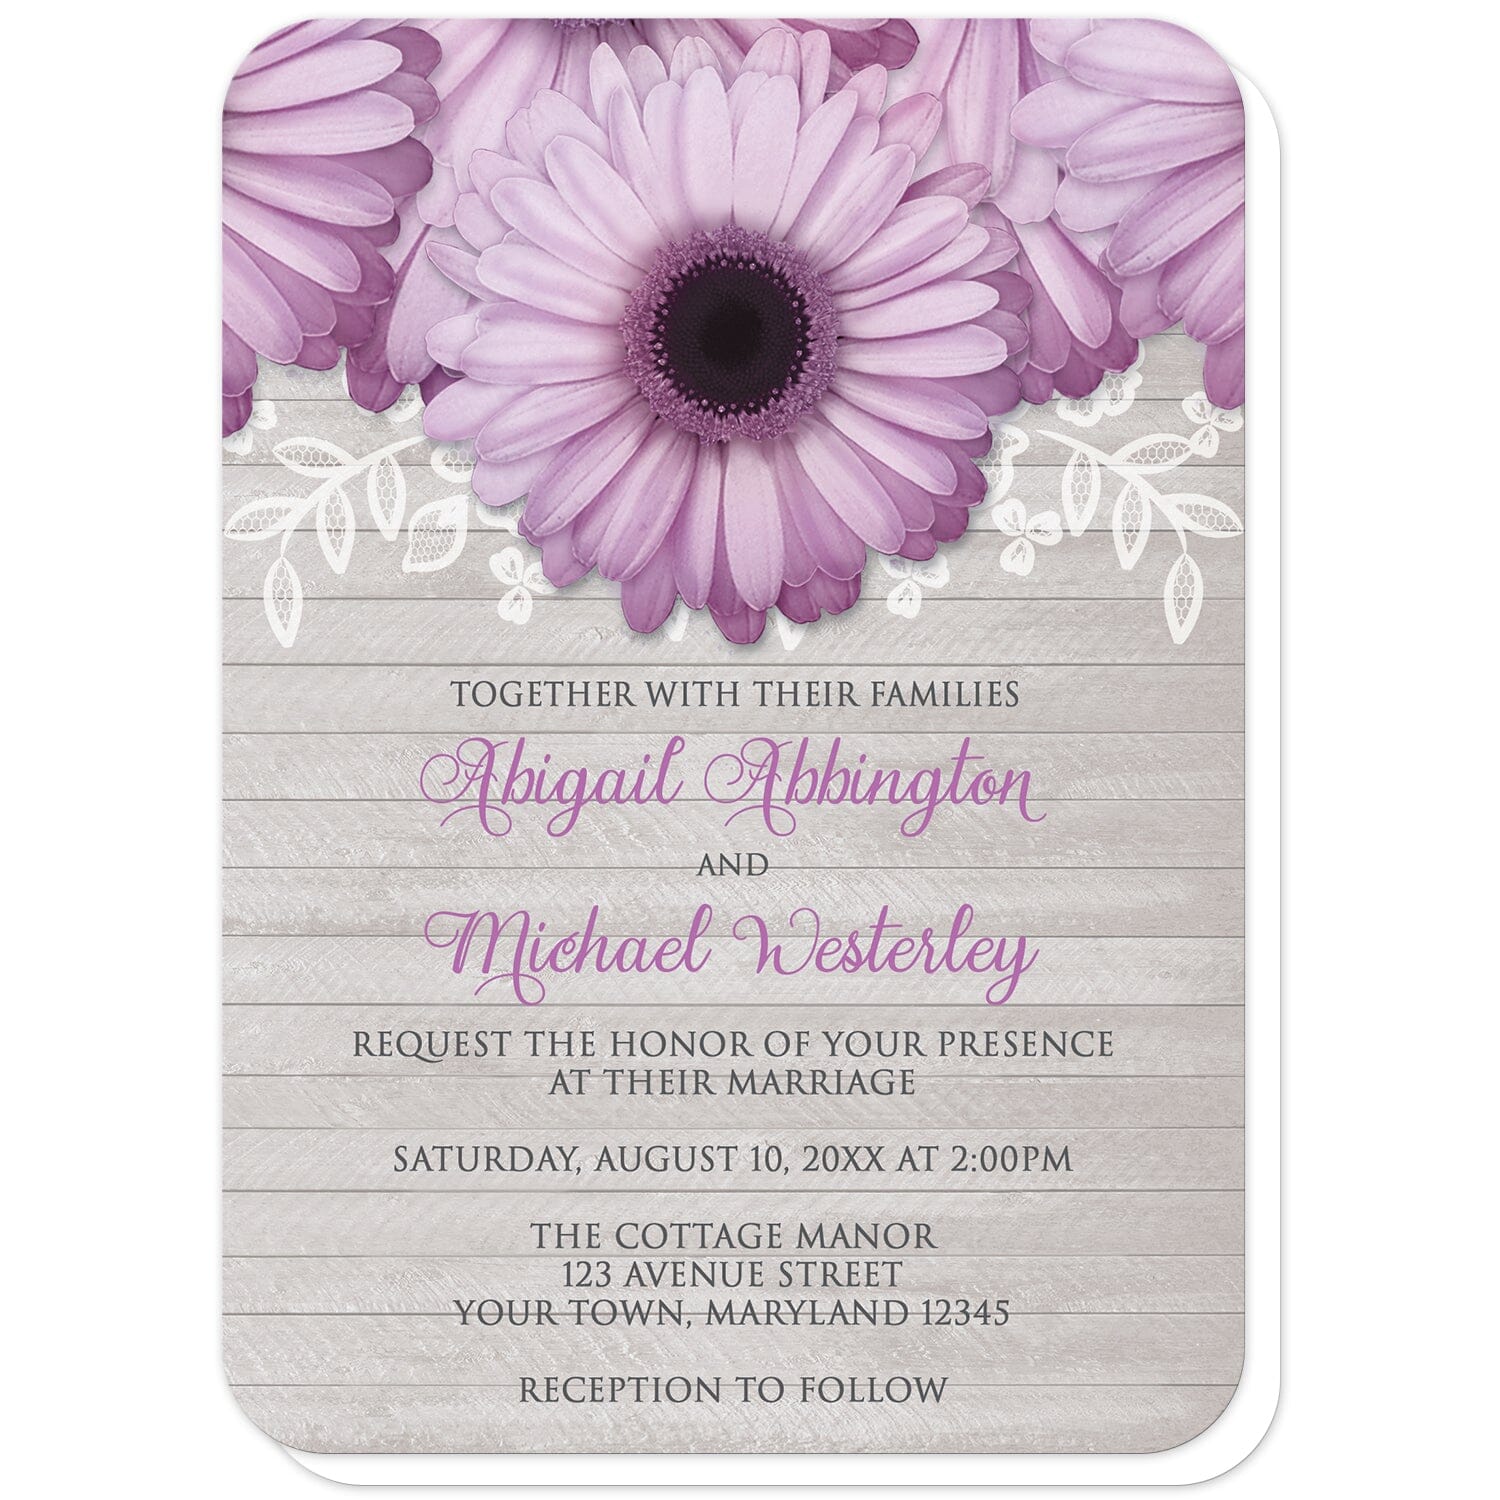 Rustic Purple Daisy Gray Wood Wedding Invitations (with rounded corners) at Artistically Invited. Rustic purple daisy gray wood wedding invitations designed with large and lovely purple daisy flowers with a white lace overlay along the top over a light gray wood background illustration. Your personalized marriage celebration details are custom printed in purple and dark gray over the wood background design below the pretty purple daisies.